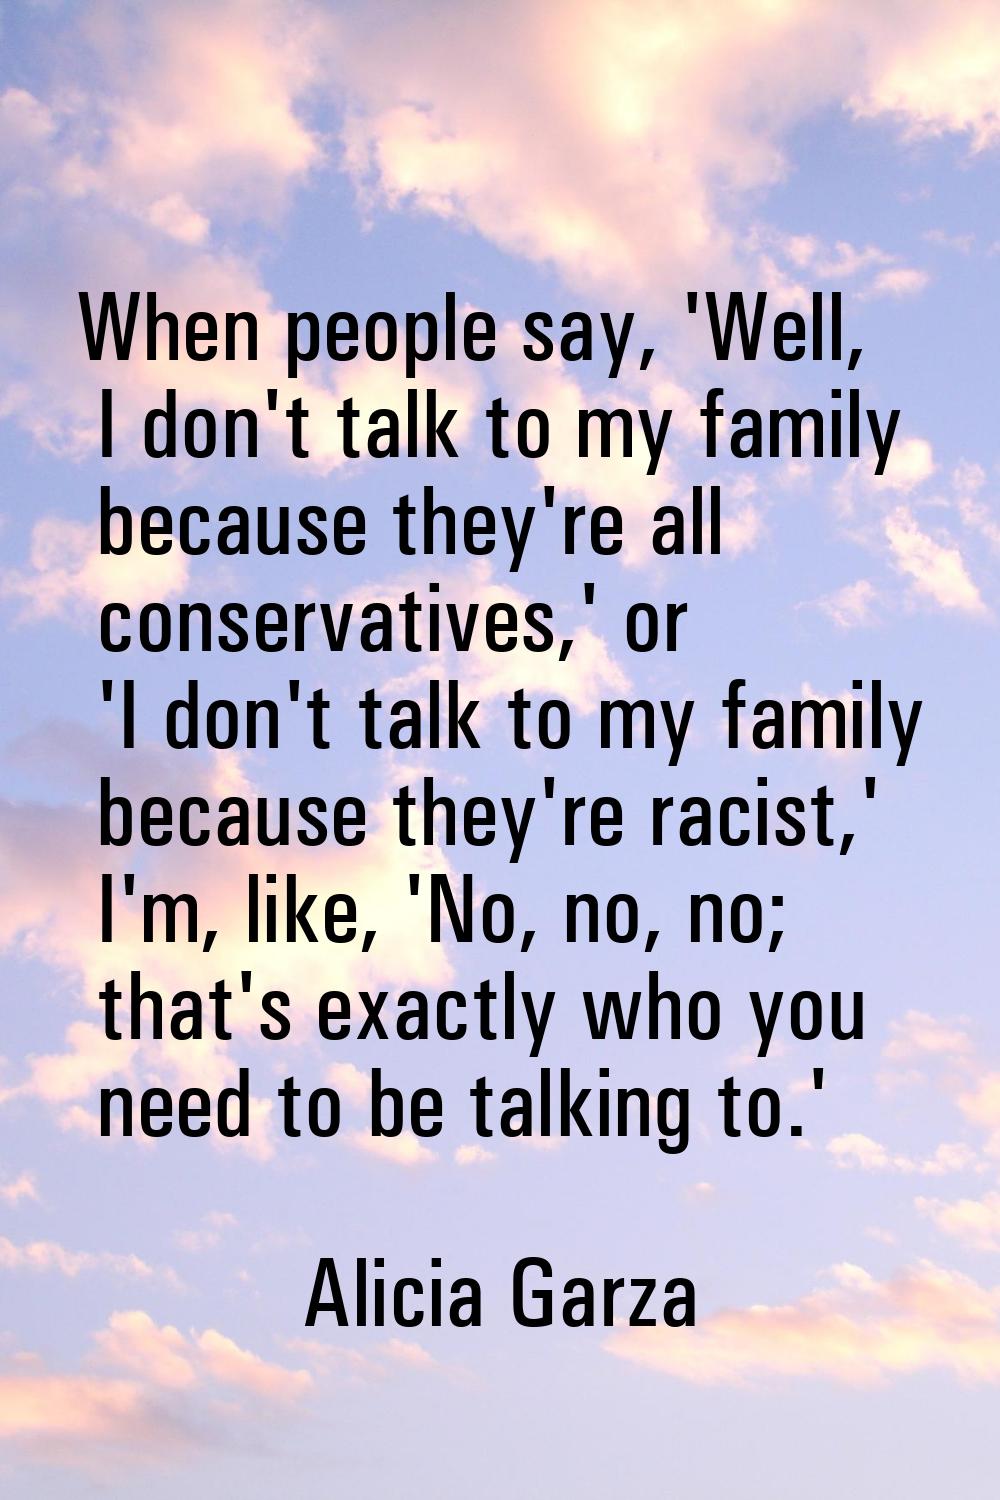 When people say, 'Well, I don't talk to my family because they're all conservatives,' or 'I don't t